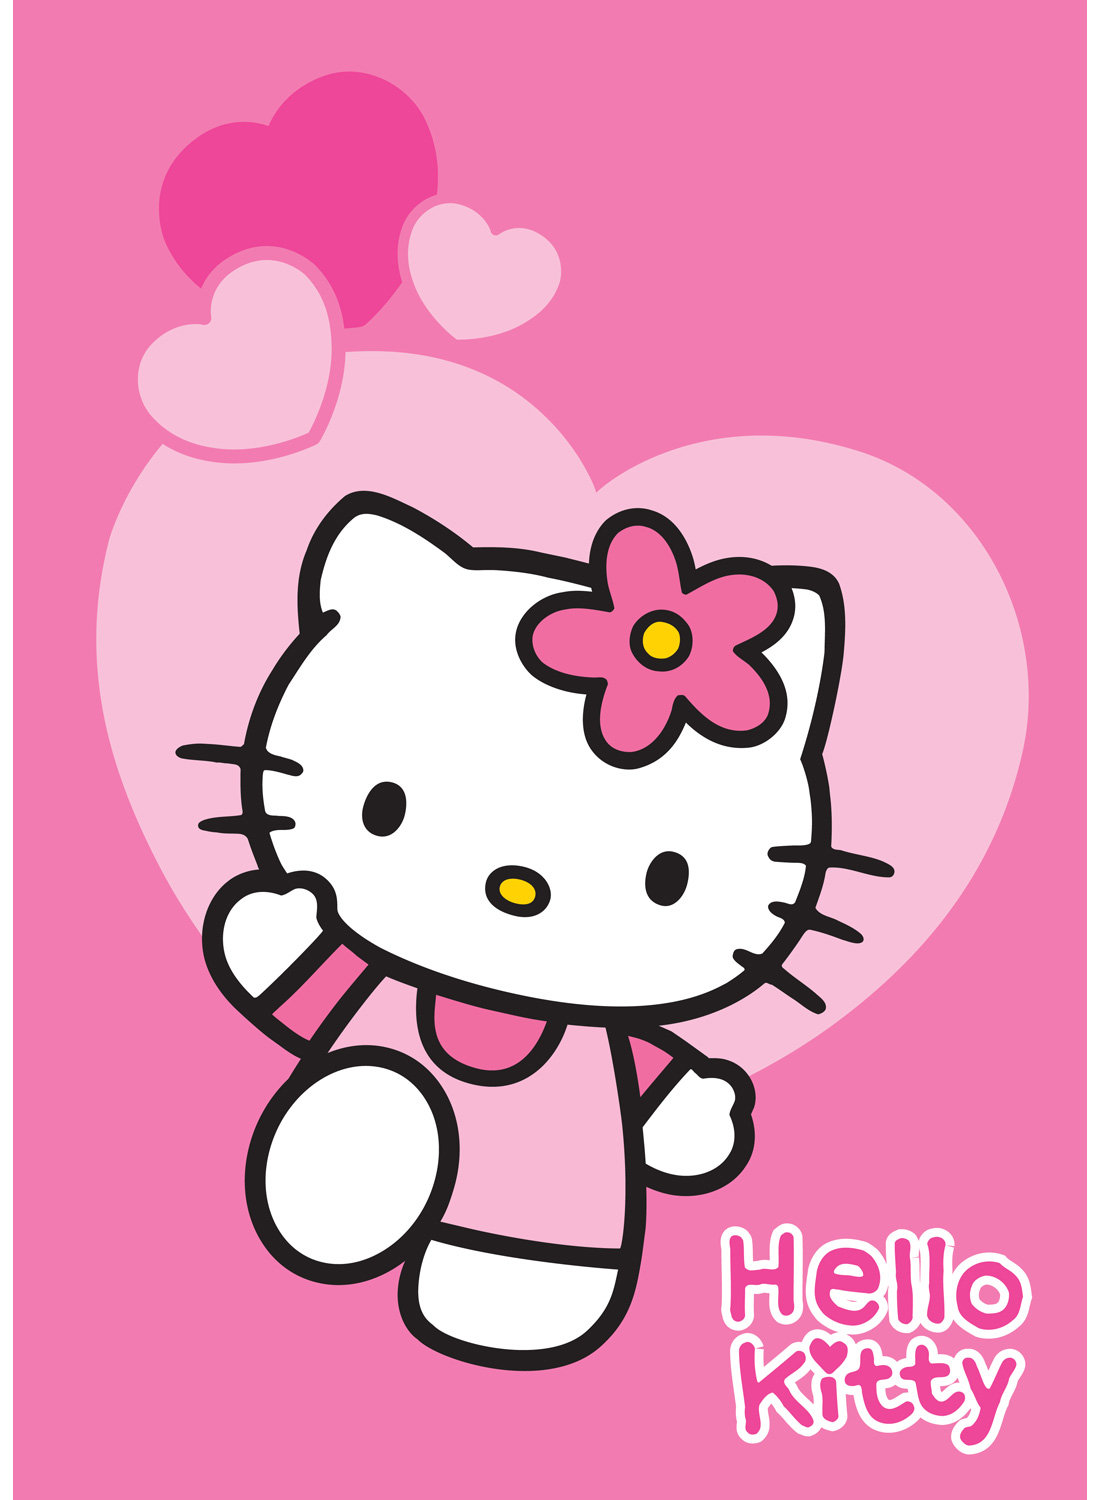 Hello Kitty – Cakes for Africa